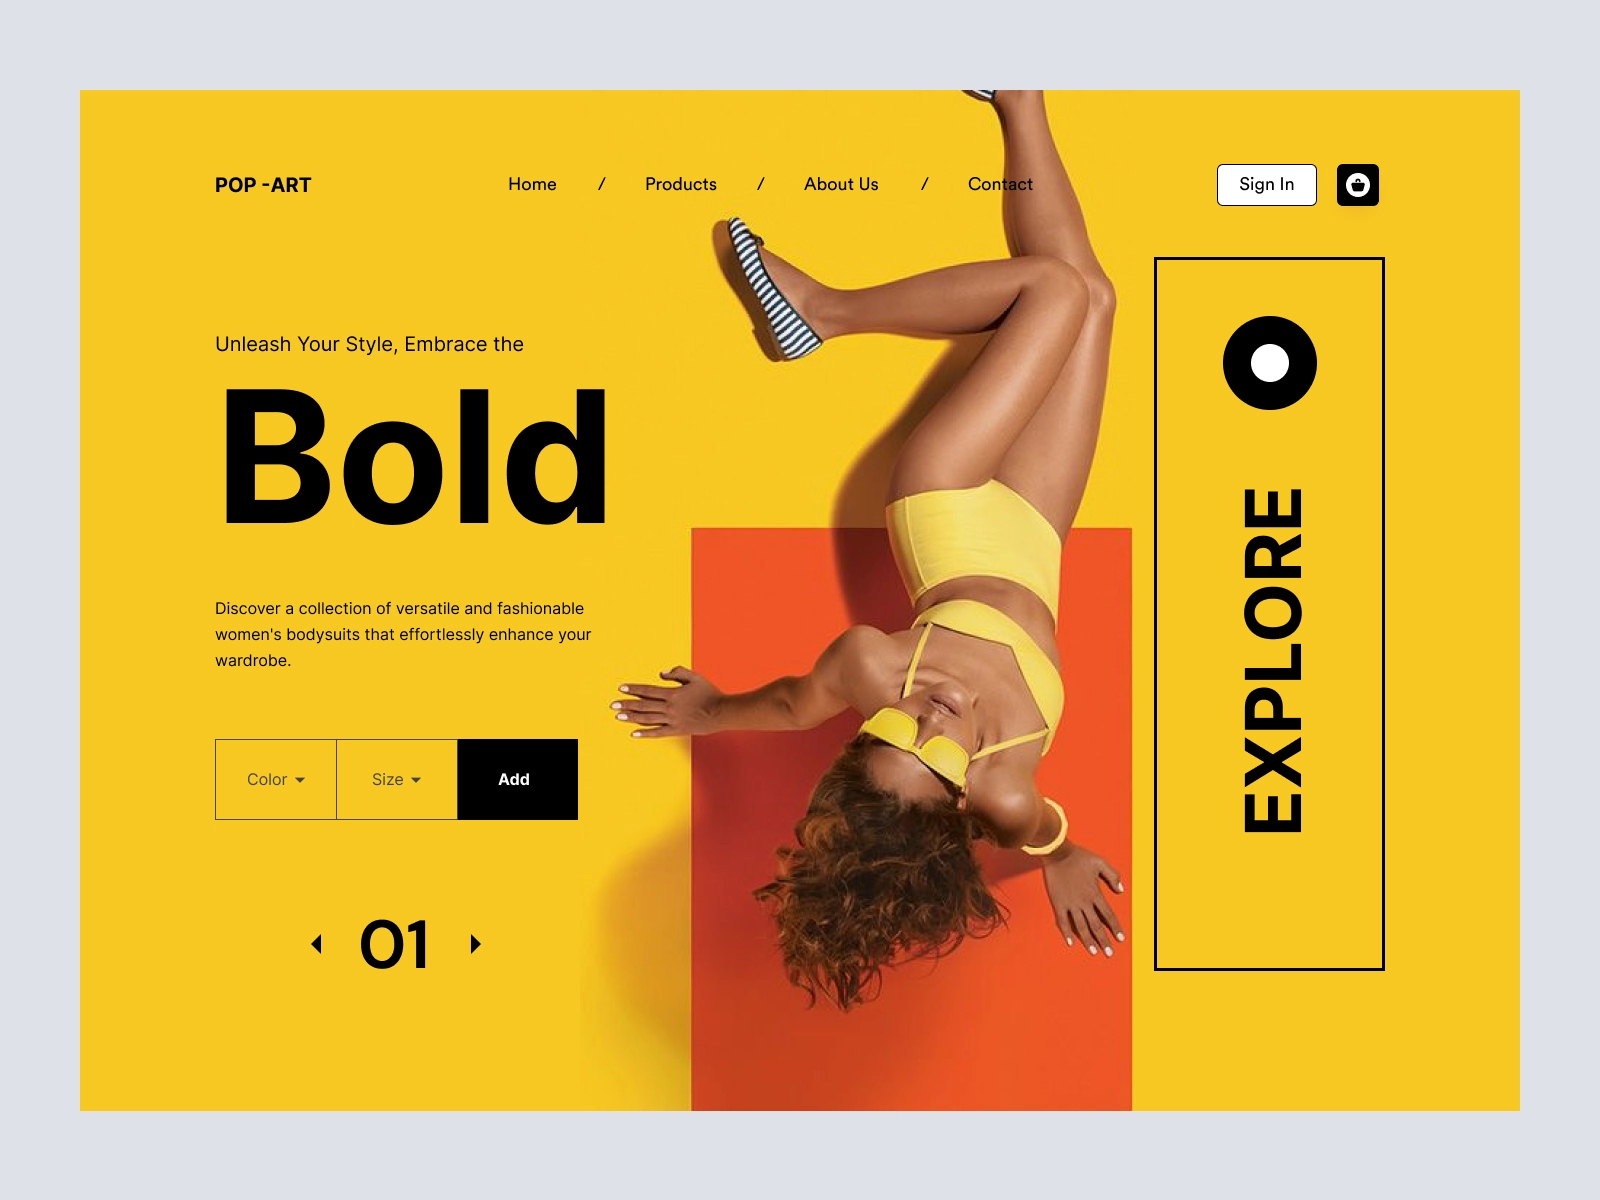 PopArt - Shopify Bold Products Store for Adobe XD - screen 1